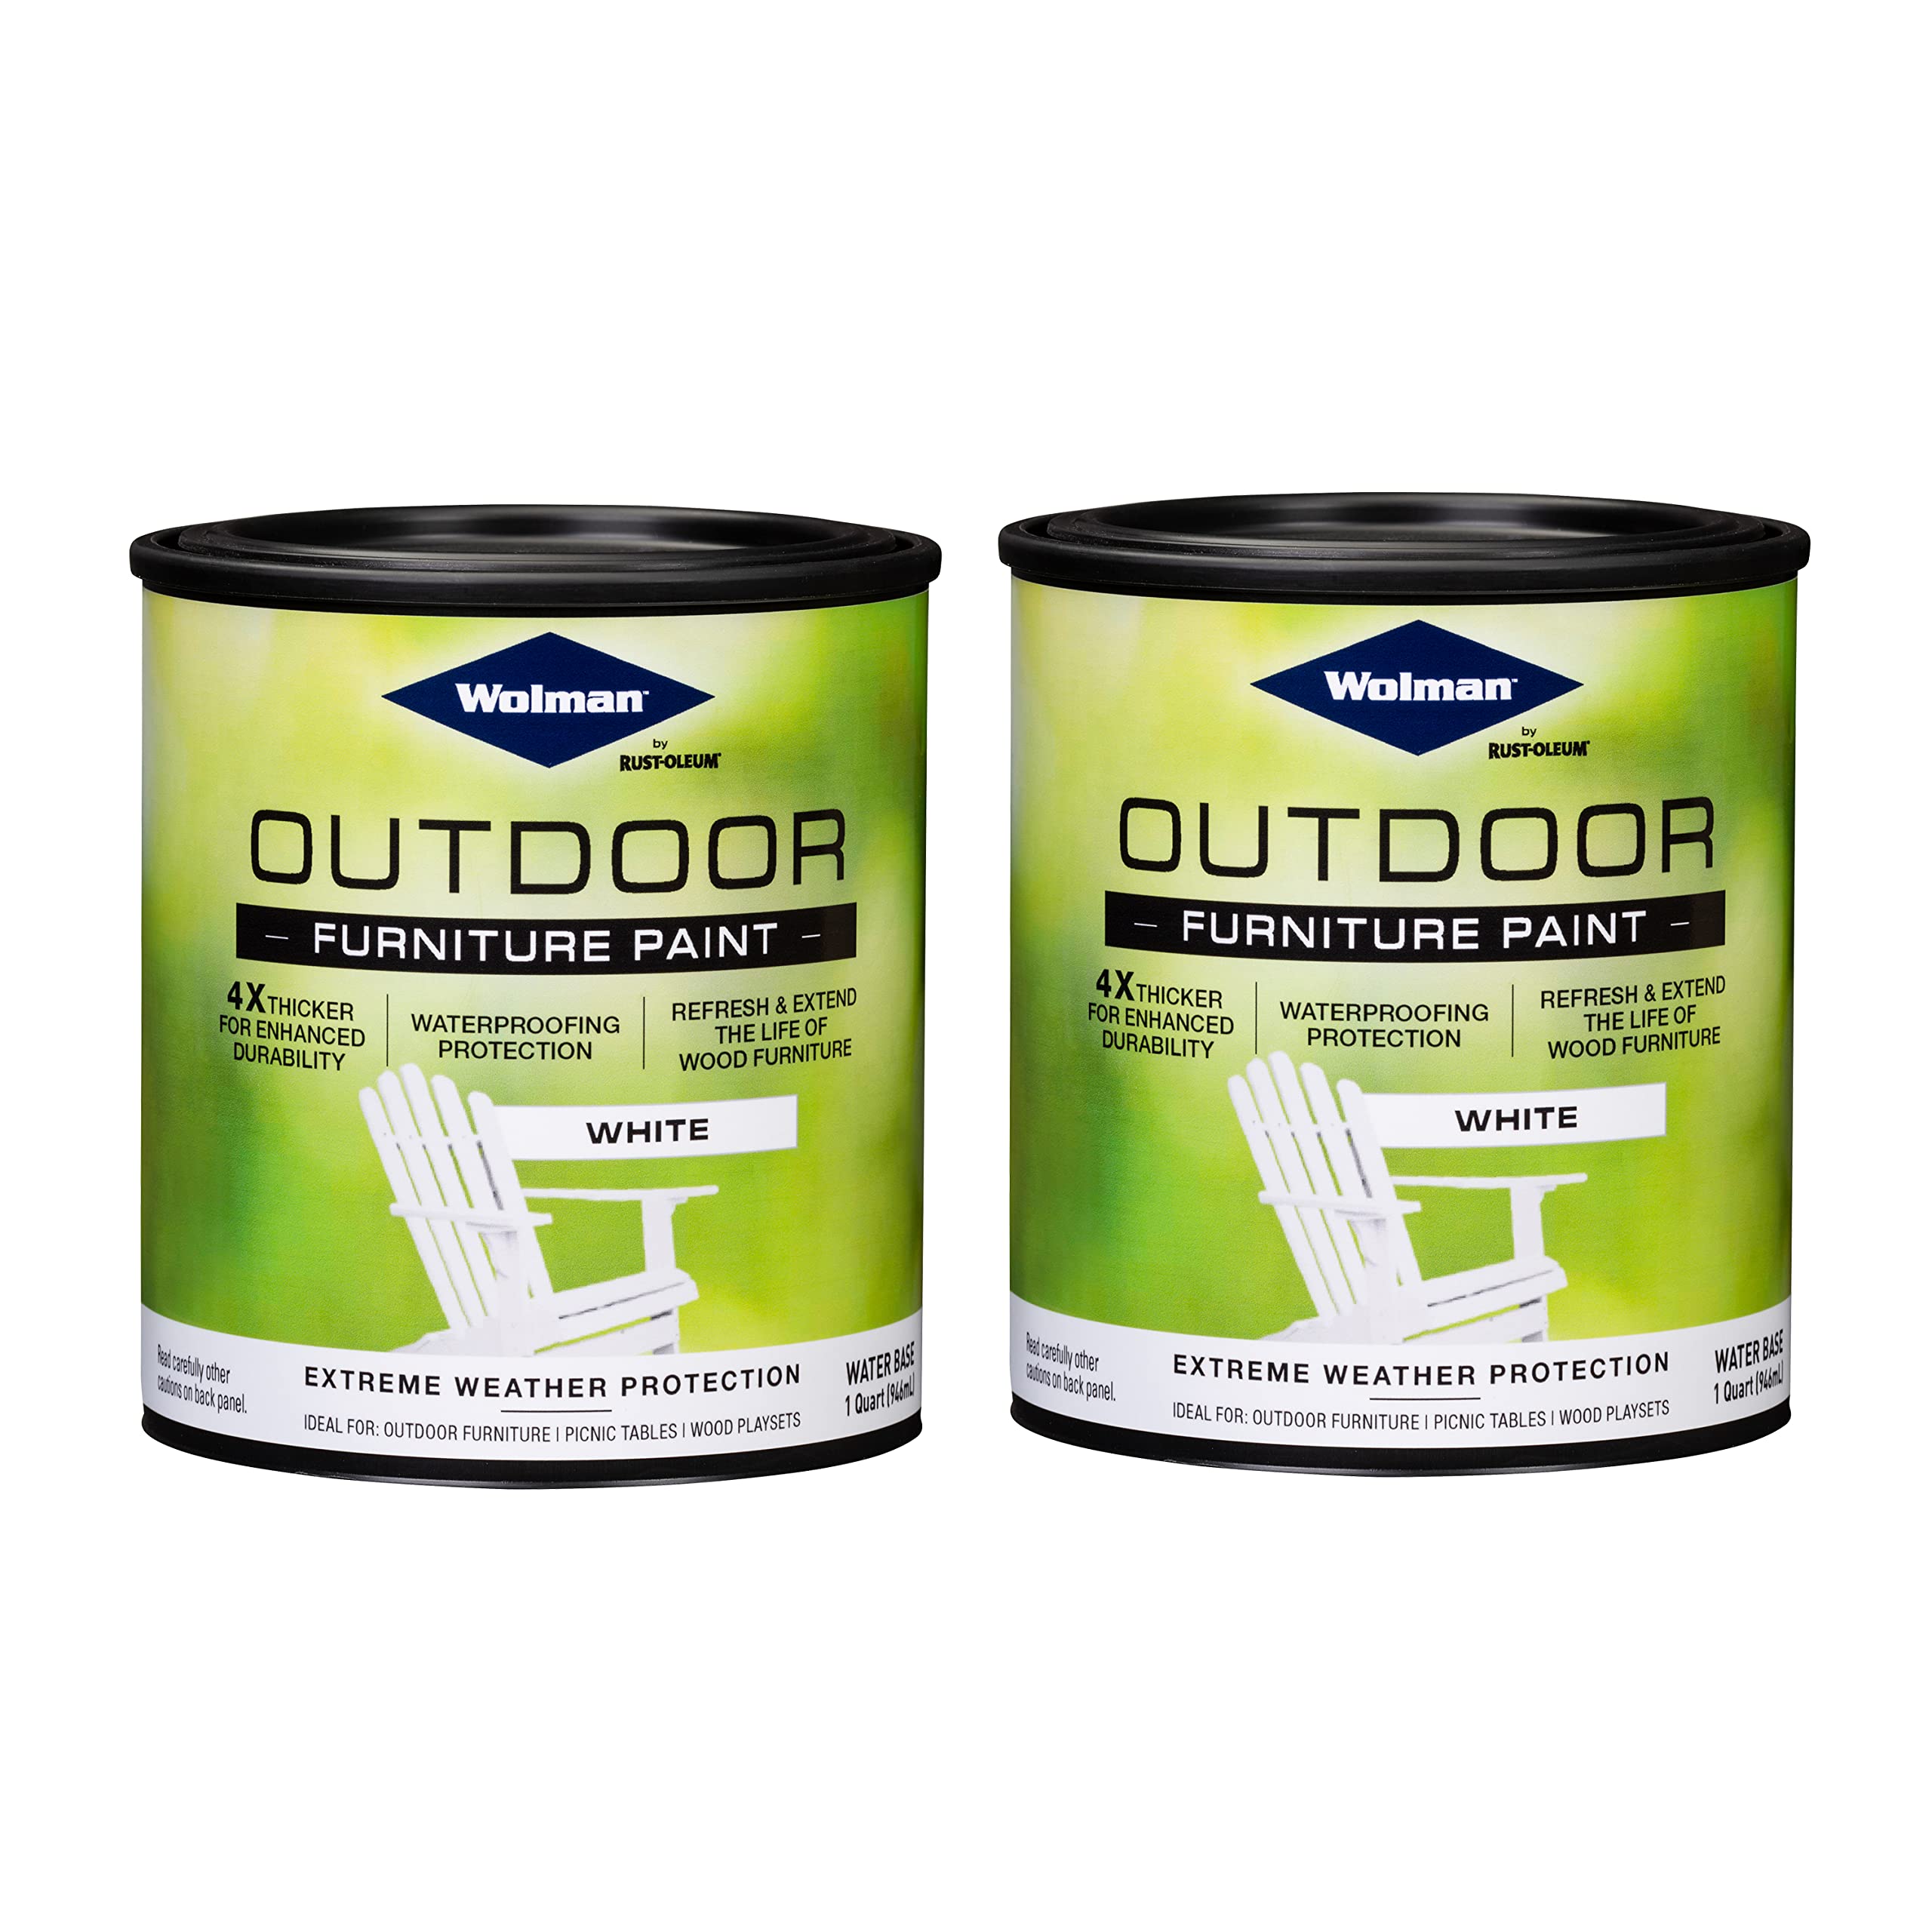 2-Count Quart Wolman Outdoor Furniture Paint by Rust-Oleum (White, 360352) $17.94 ($8.97 each) + Free Shipping w/ Prime or on $25+